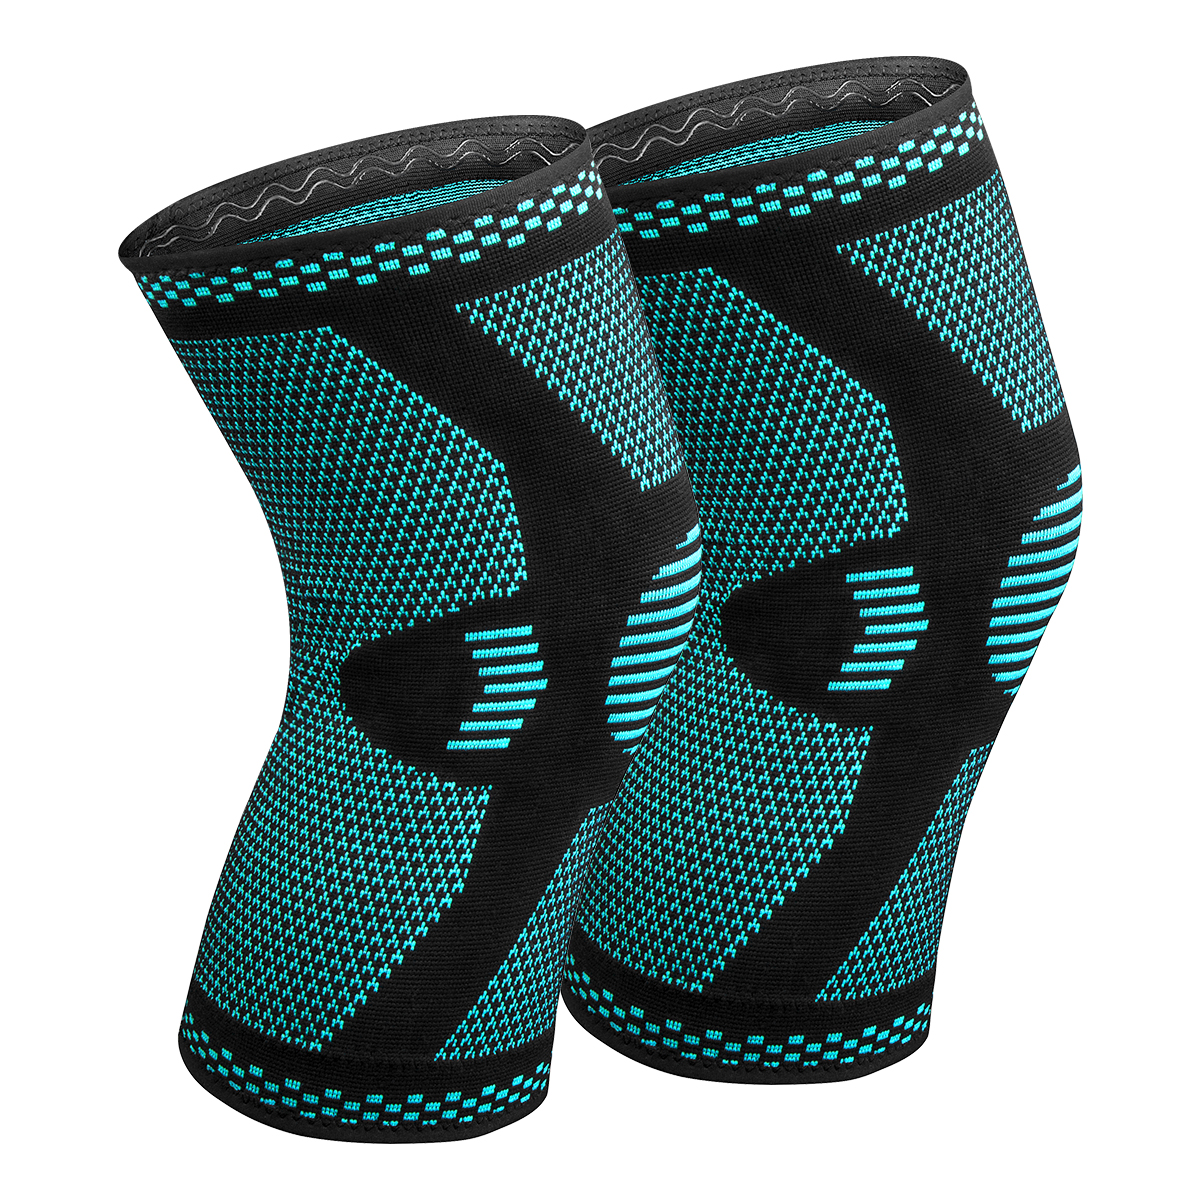 Knee Support for Men Women - AVIDDA Ultra Compression Knee Sleeve for Arthritis Pain Relief Meniscus Tear, Nonslip Sport Knee Brace for Running Squats Crossfit Weight lifting Football Basketball 